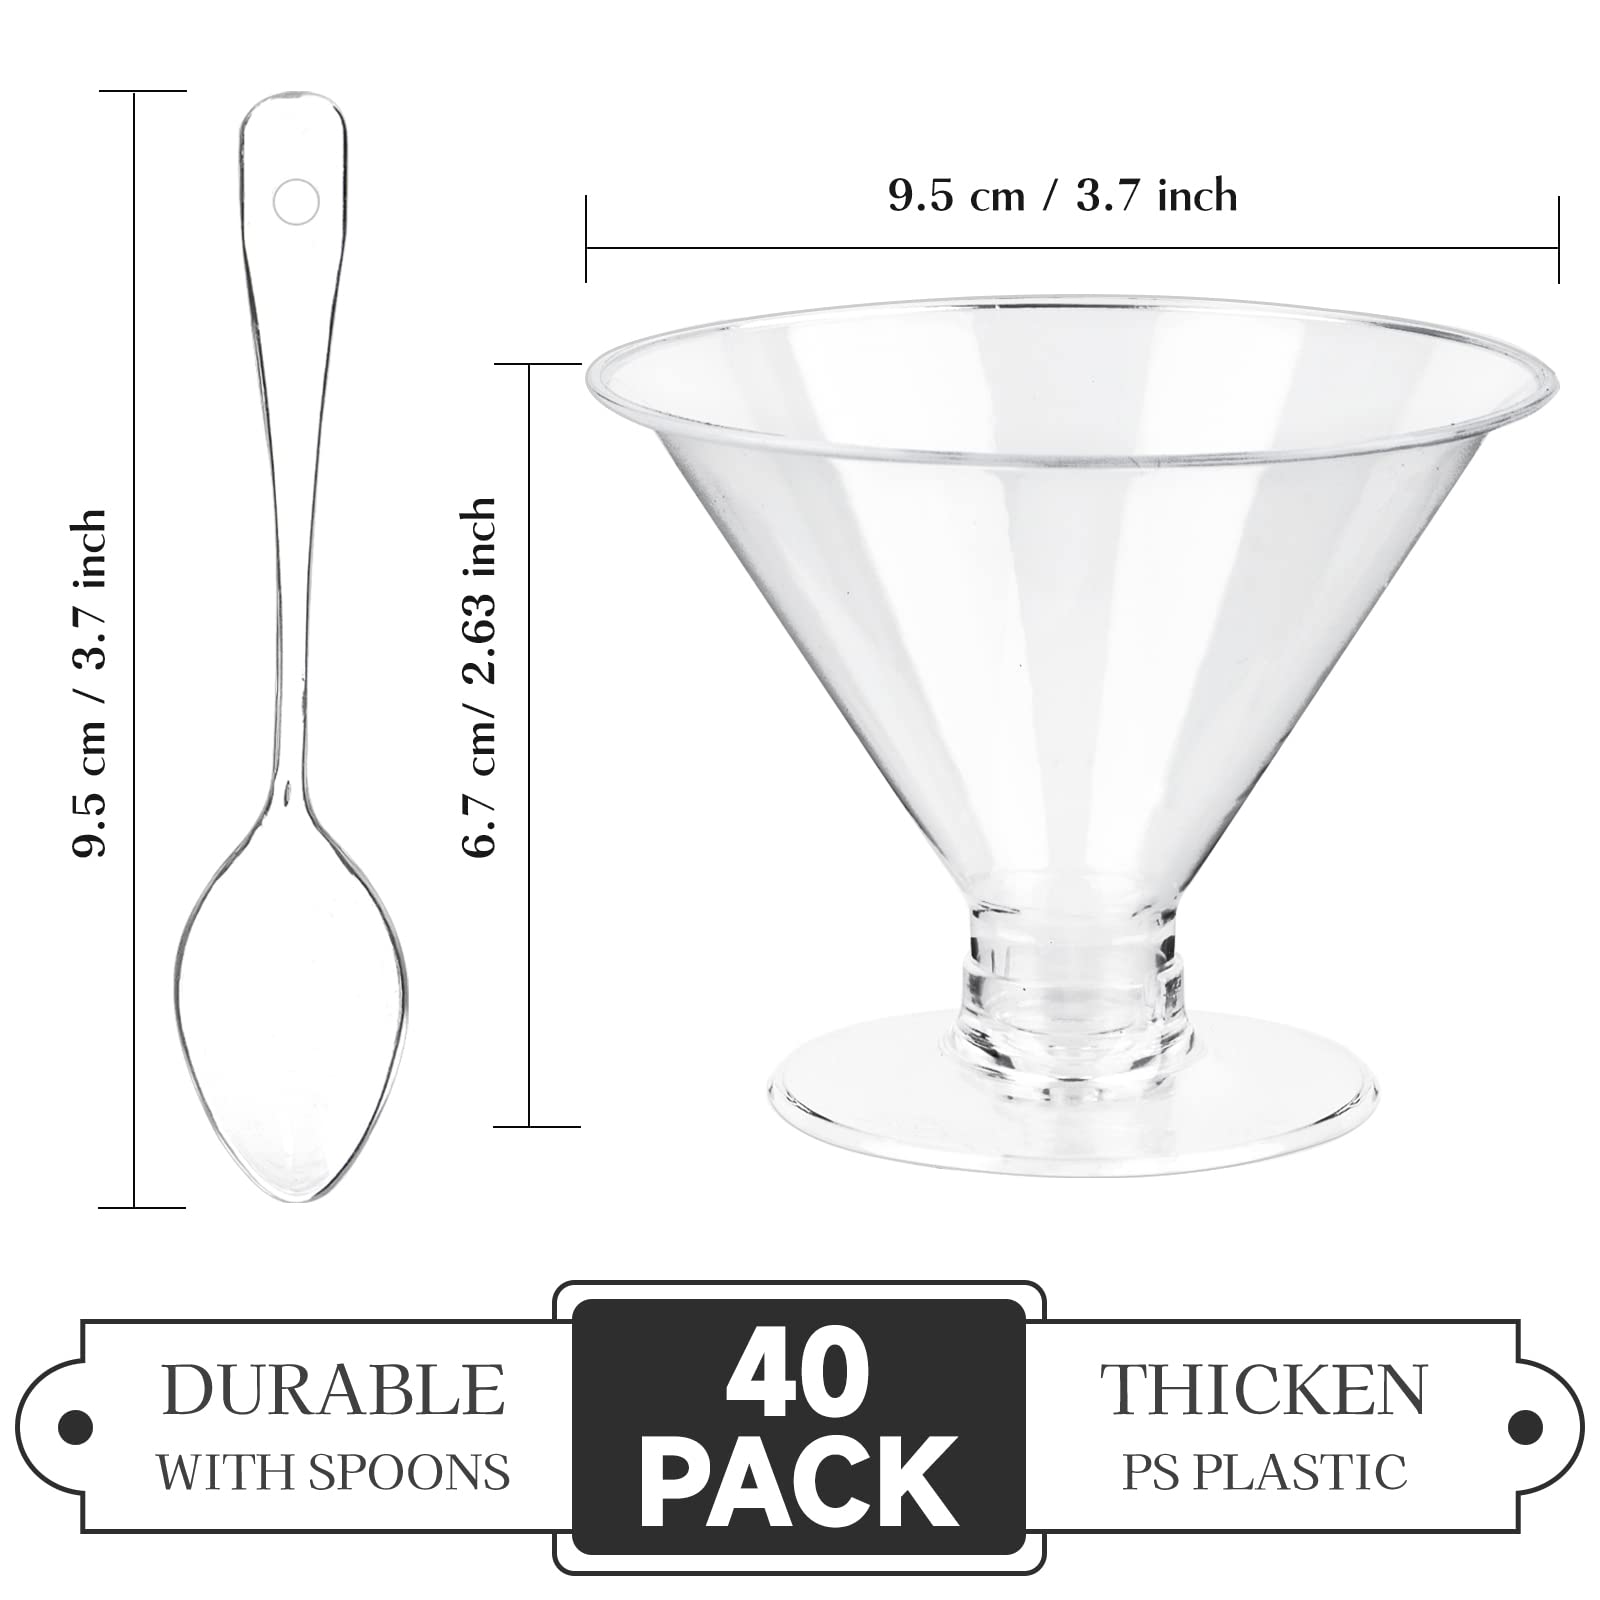 TOFLEN 40 Pack Plastic Martini Glasses 5 Oz Mini Dessert Cups with Spoons Reuasble Cocktail Shooters Clear Short Stem Shot Glasses for Party Wine, Desserts and Appetizers